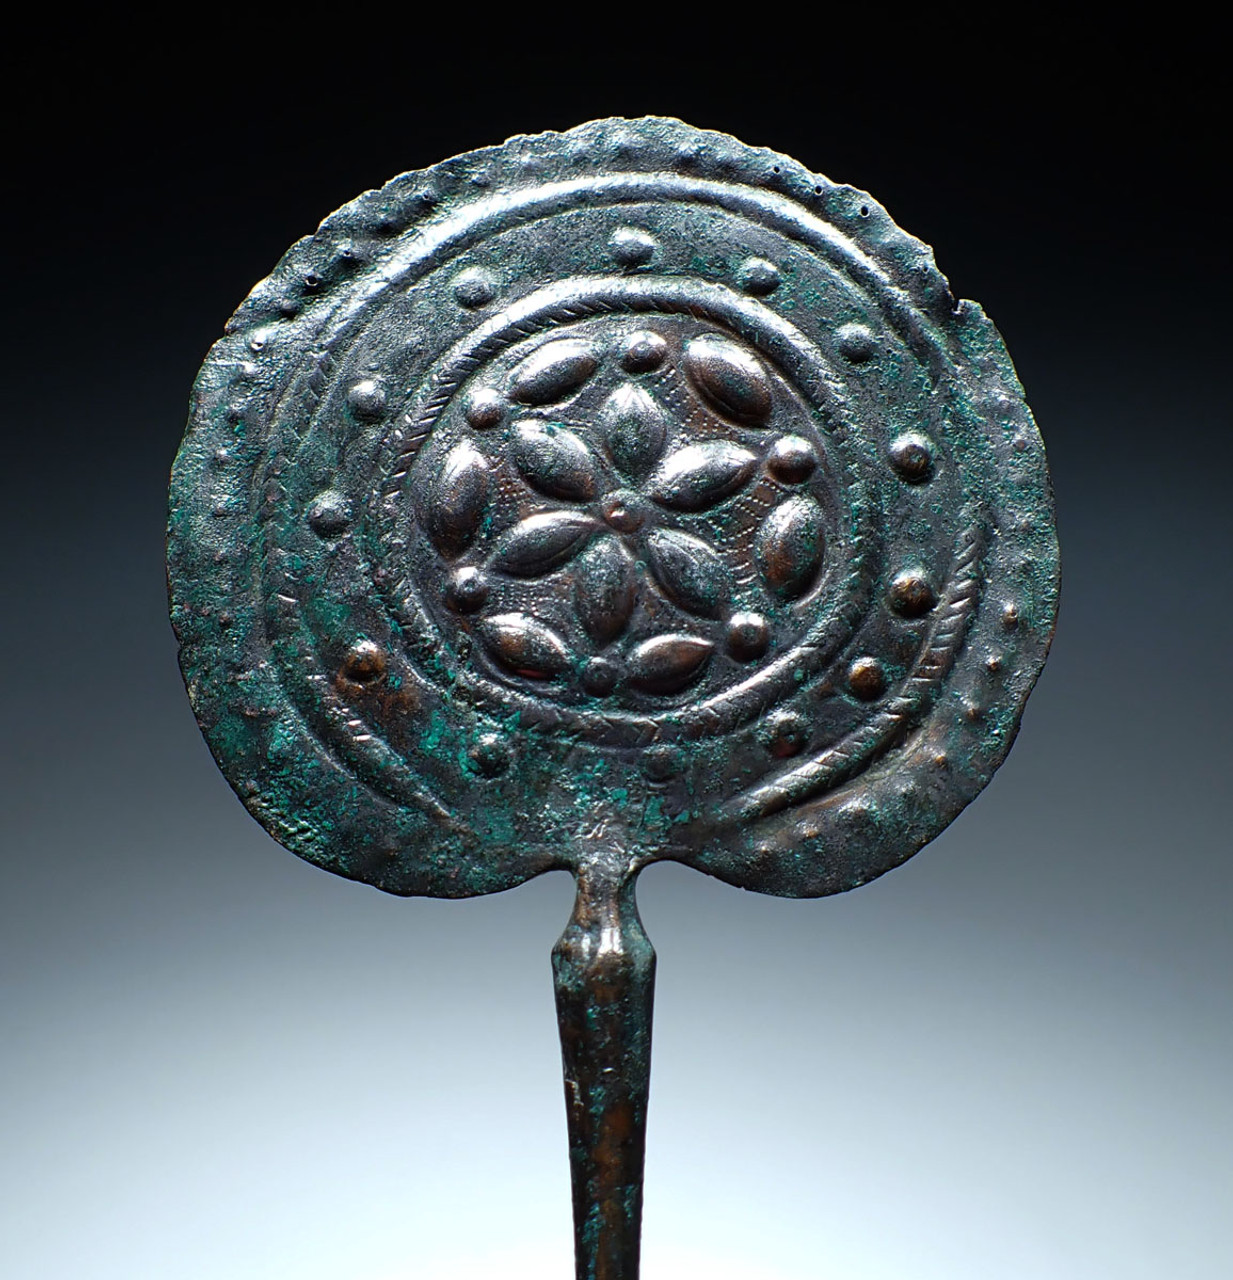 RARE ANCIENT IRANIAN LURISTAN BRONZE DISK-HEADED PIN WITH INTRICATE STAMPED AND CHASED FLORAL DESIGNS  *LUR370